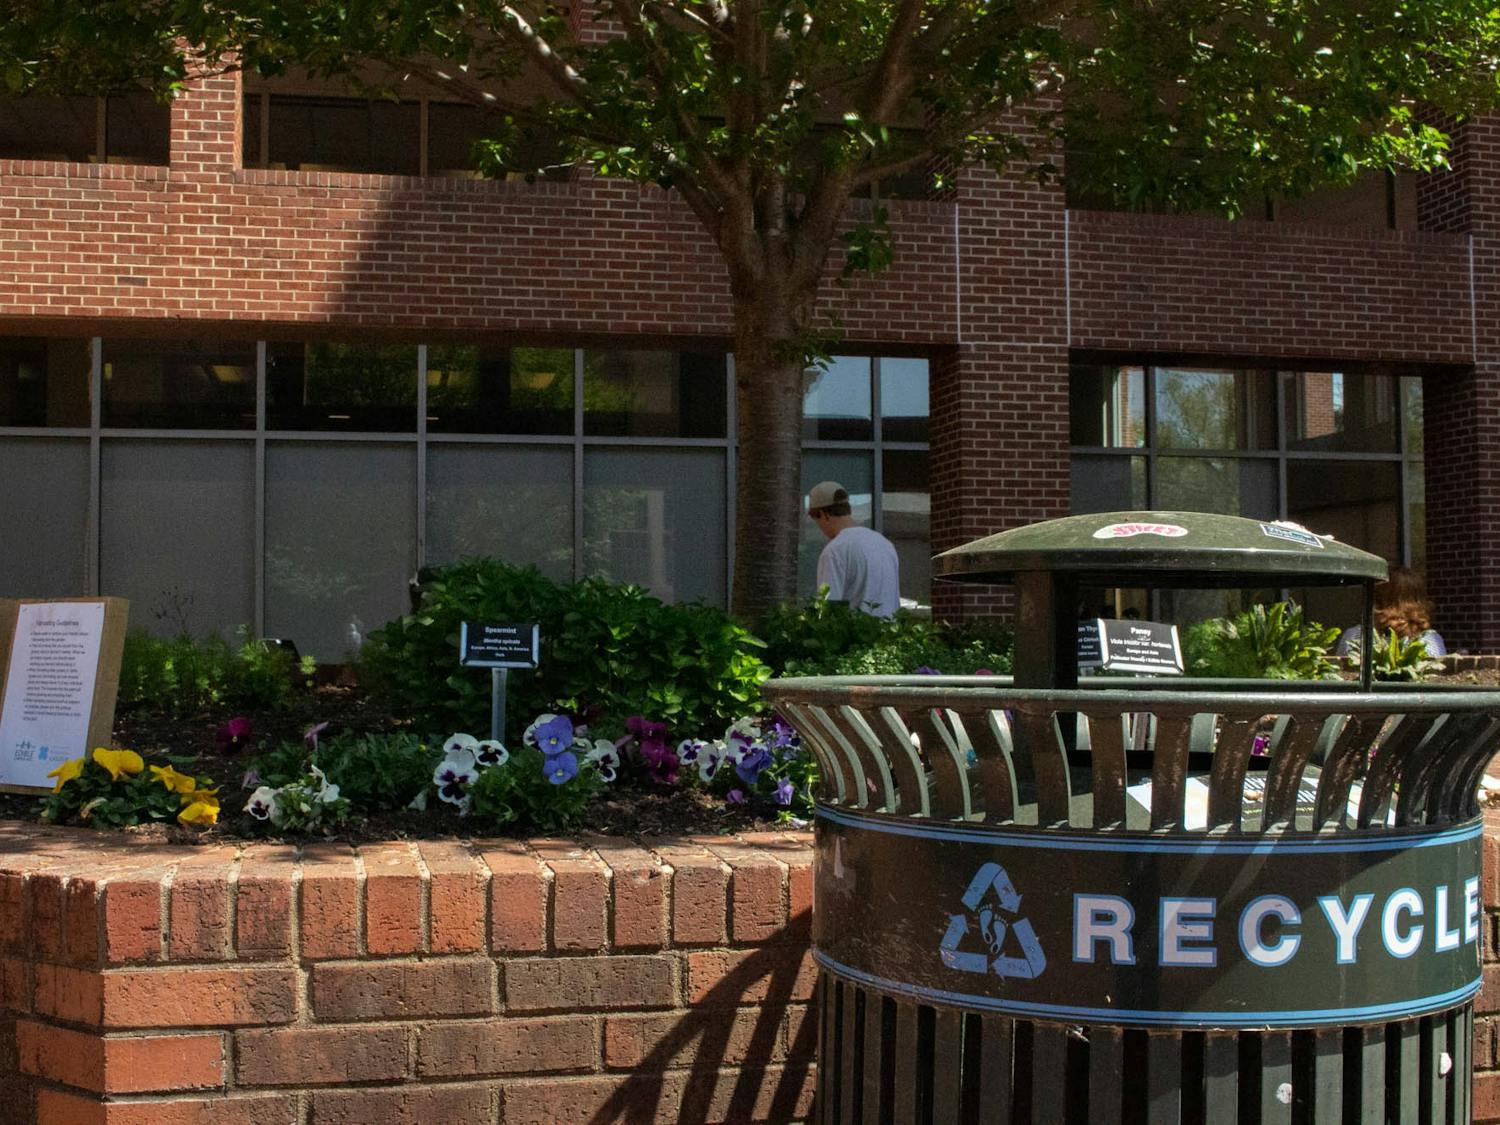 A recycling can is pictured on UNC's campus